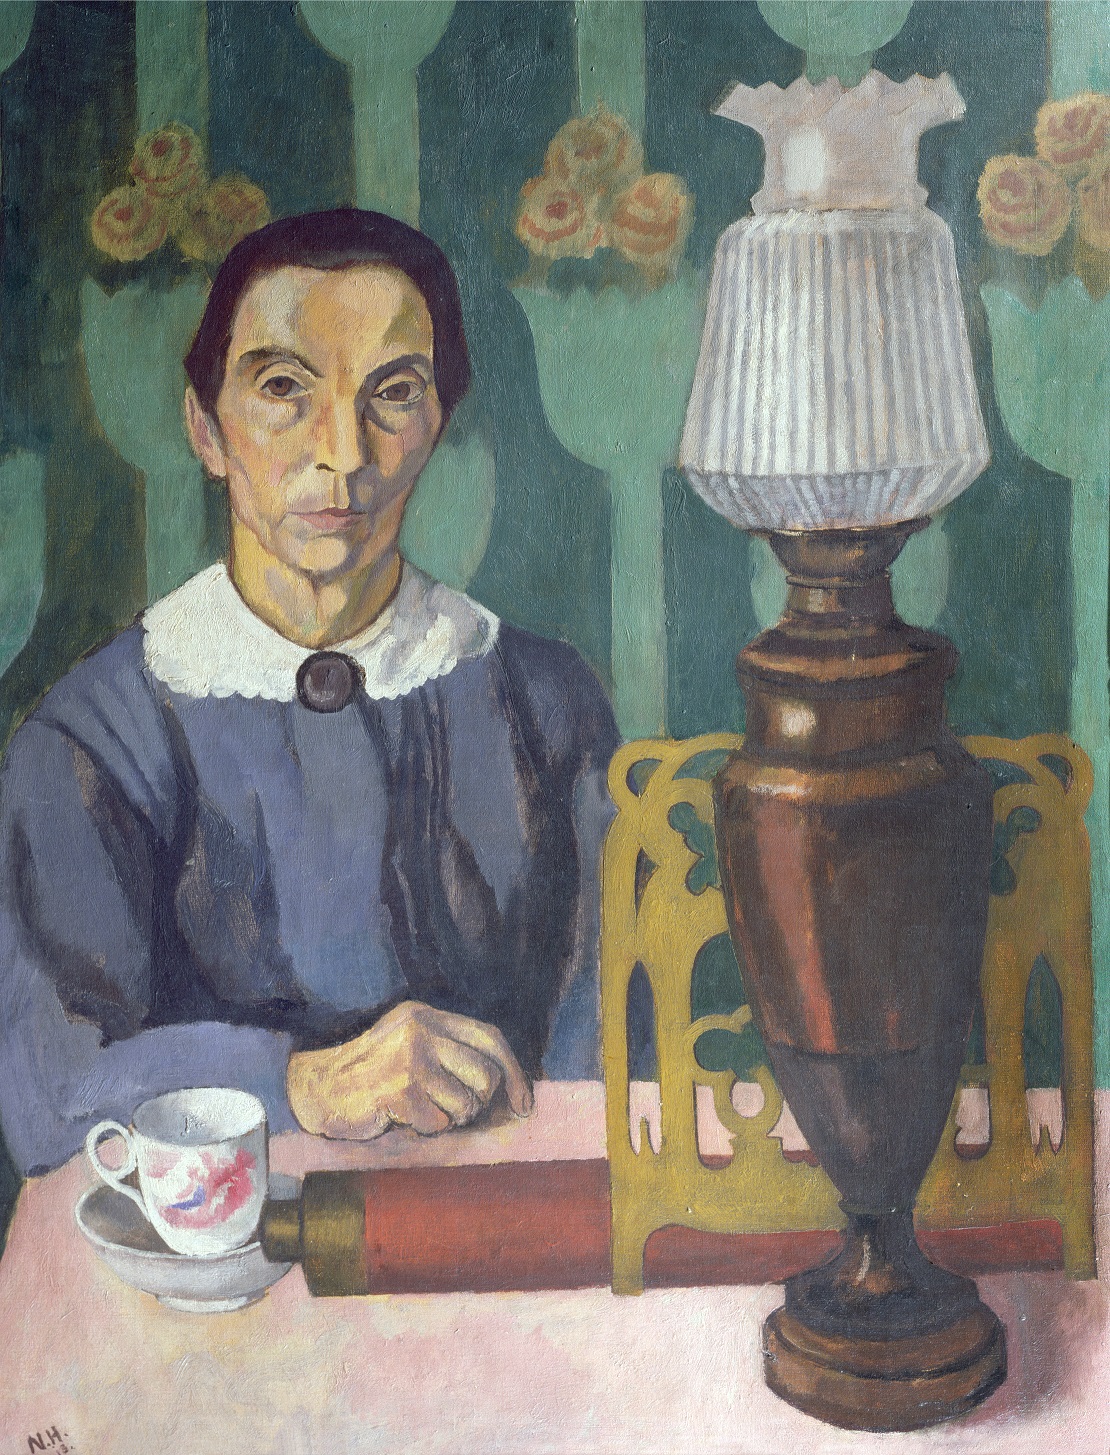 A colourful painting of an older woman sat at a table with a cup of tea. She is wearing a blue dress with a white collar and behind her is green patterned wallpaper. To the rights is a lamp.